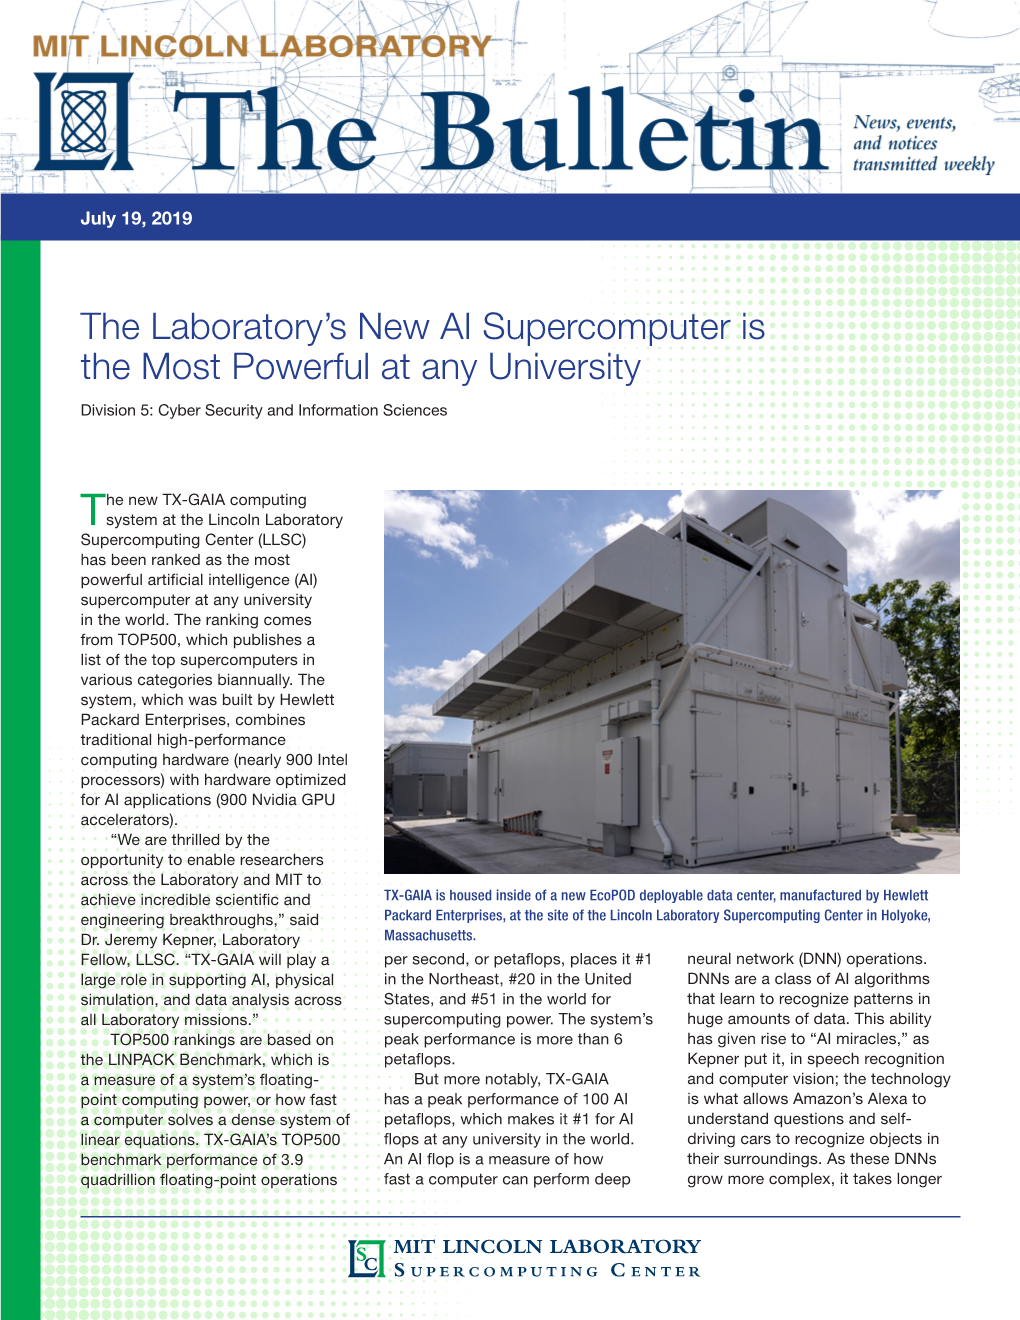 The Laboratory's New AI Supercomputer Is the Most